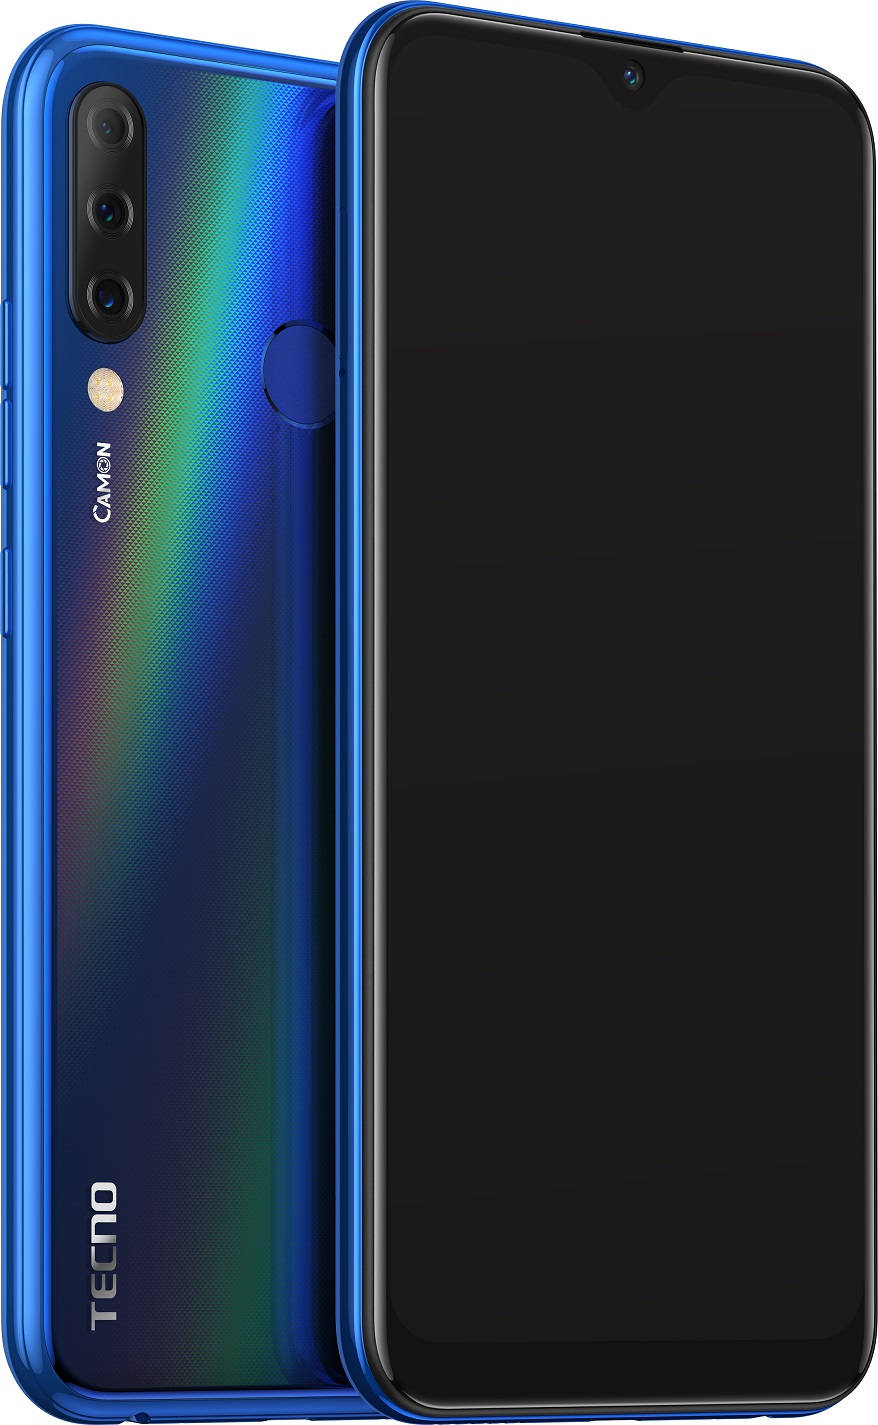 TECNO brings the “Power of 3” with CAMON i4; launches triple rear camera with 4GB RAM at a price of INR 11999